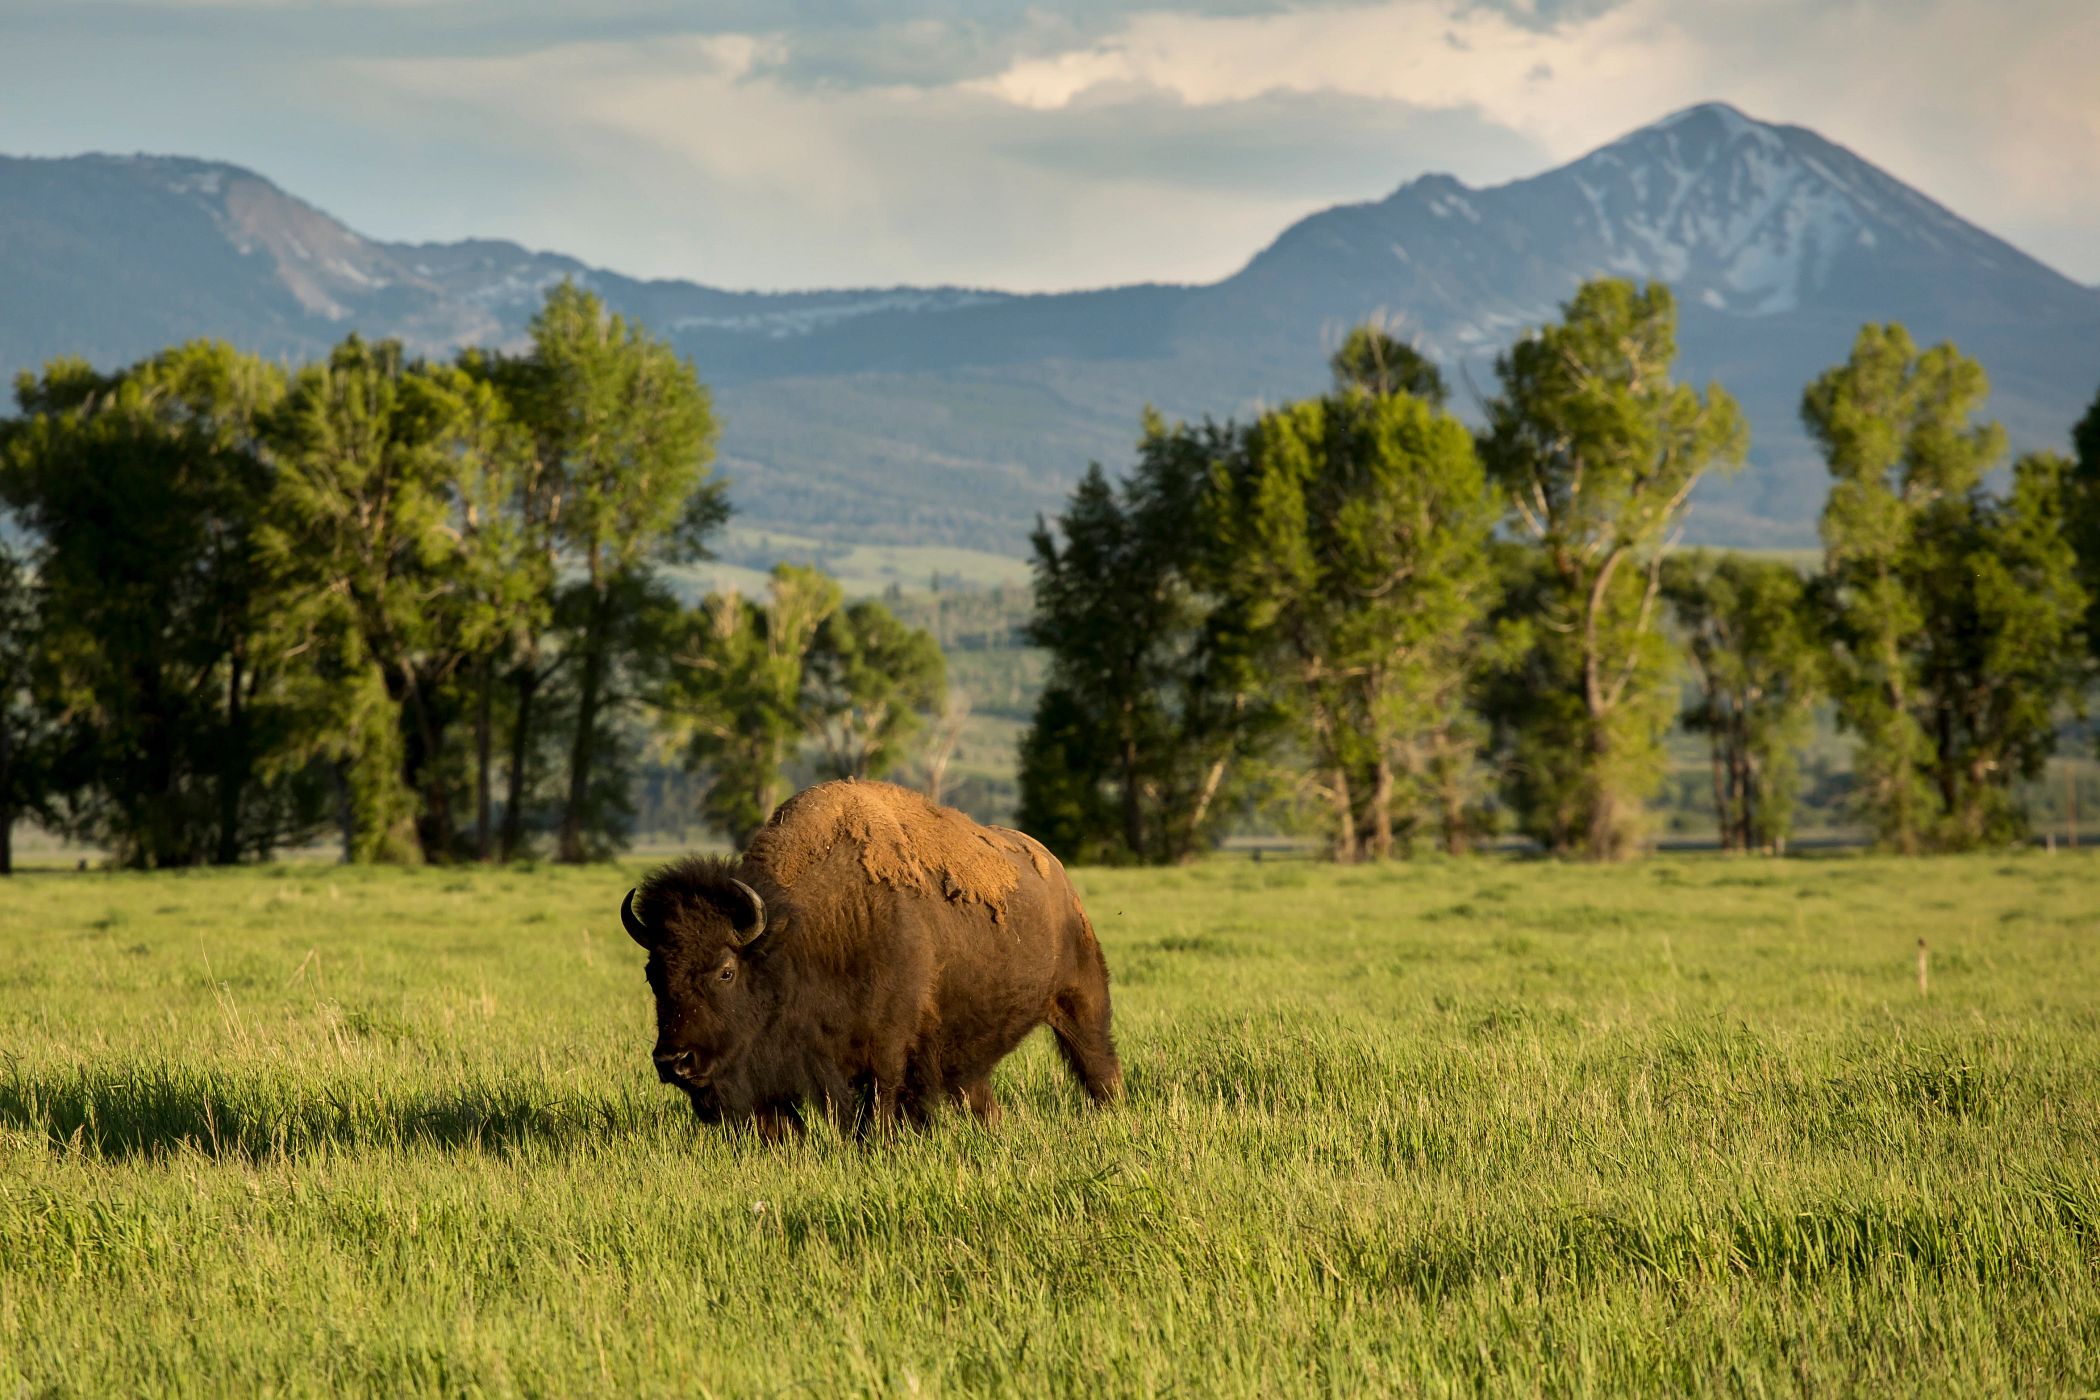 bison in field with mountains in background